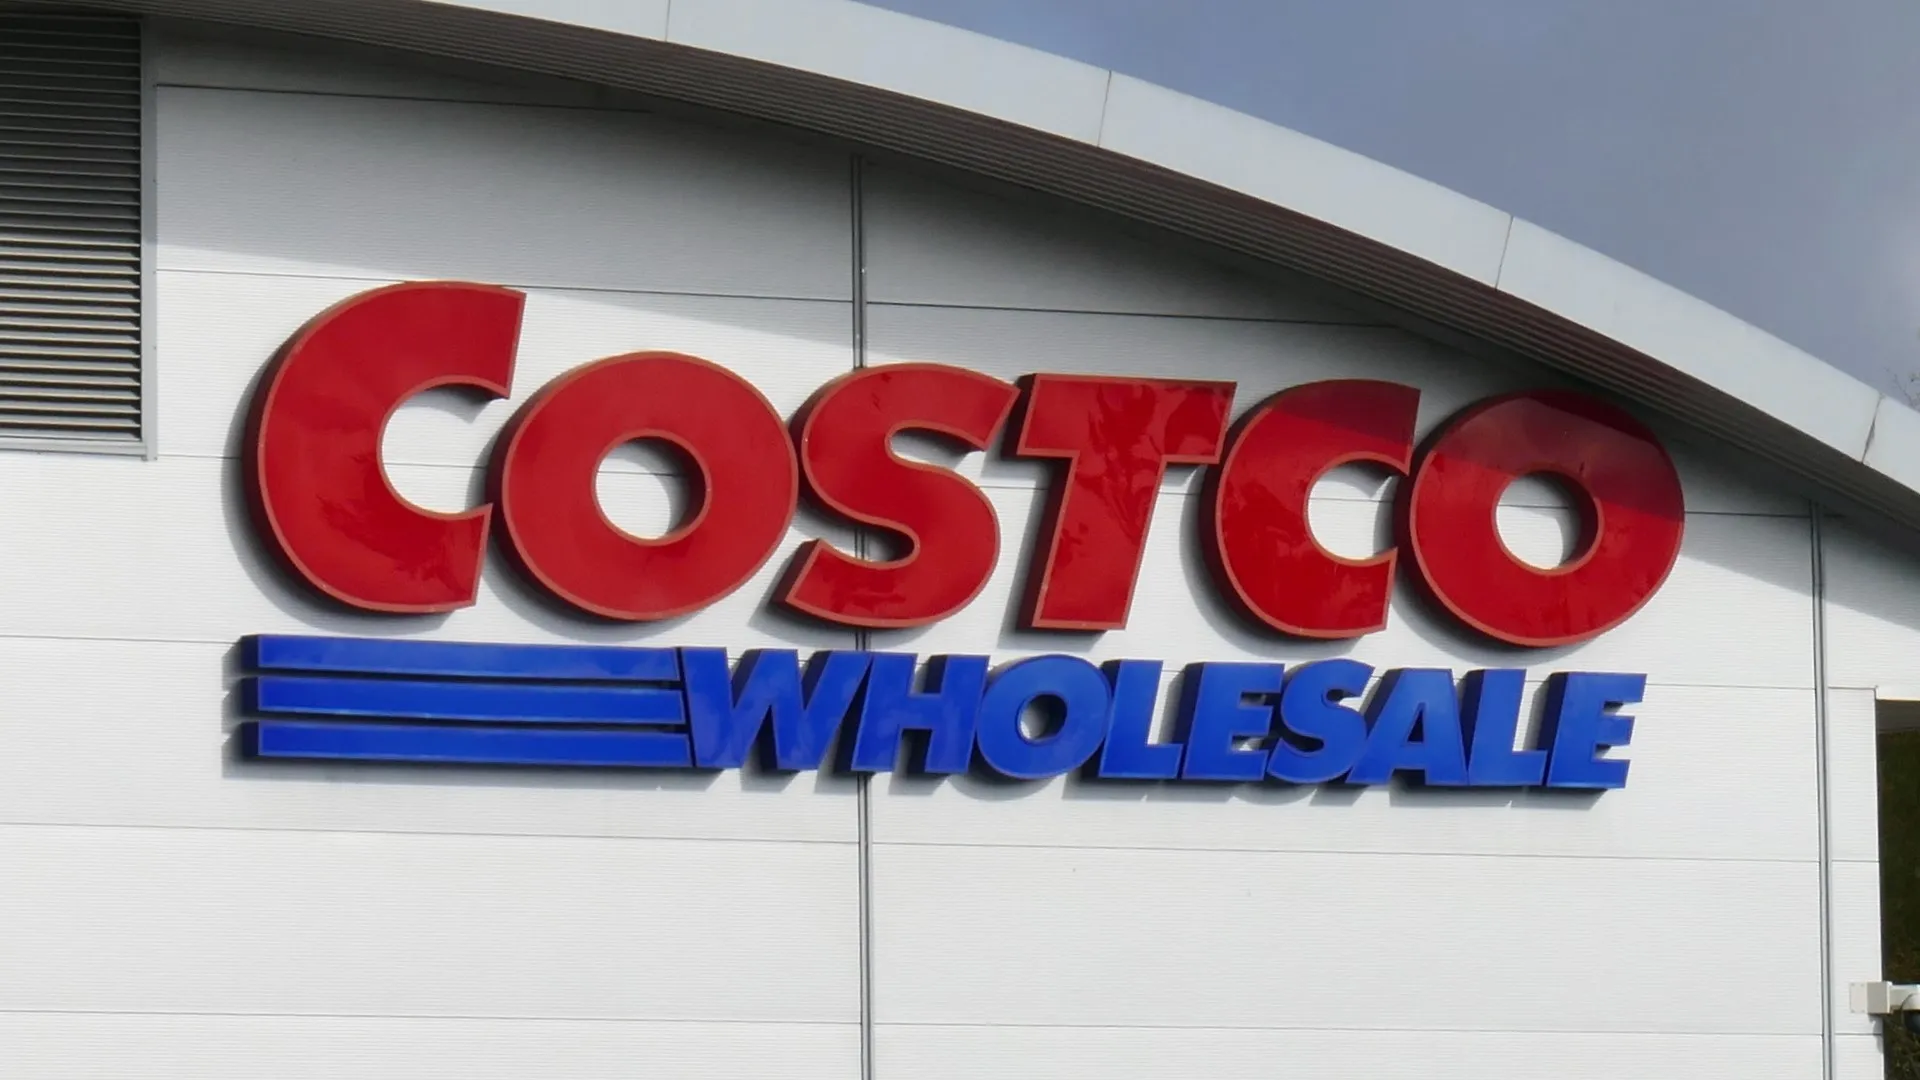 New Reading Costco petrol station opens forecourt to customers, Green Park, Reading, UK - 13 Oct 2022